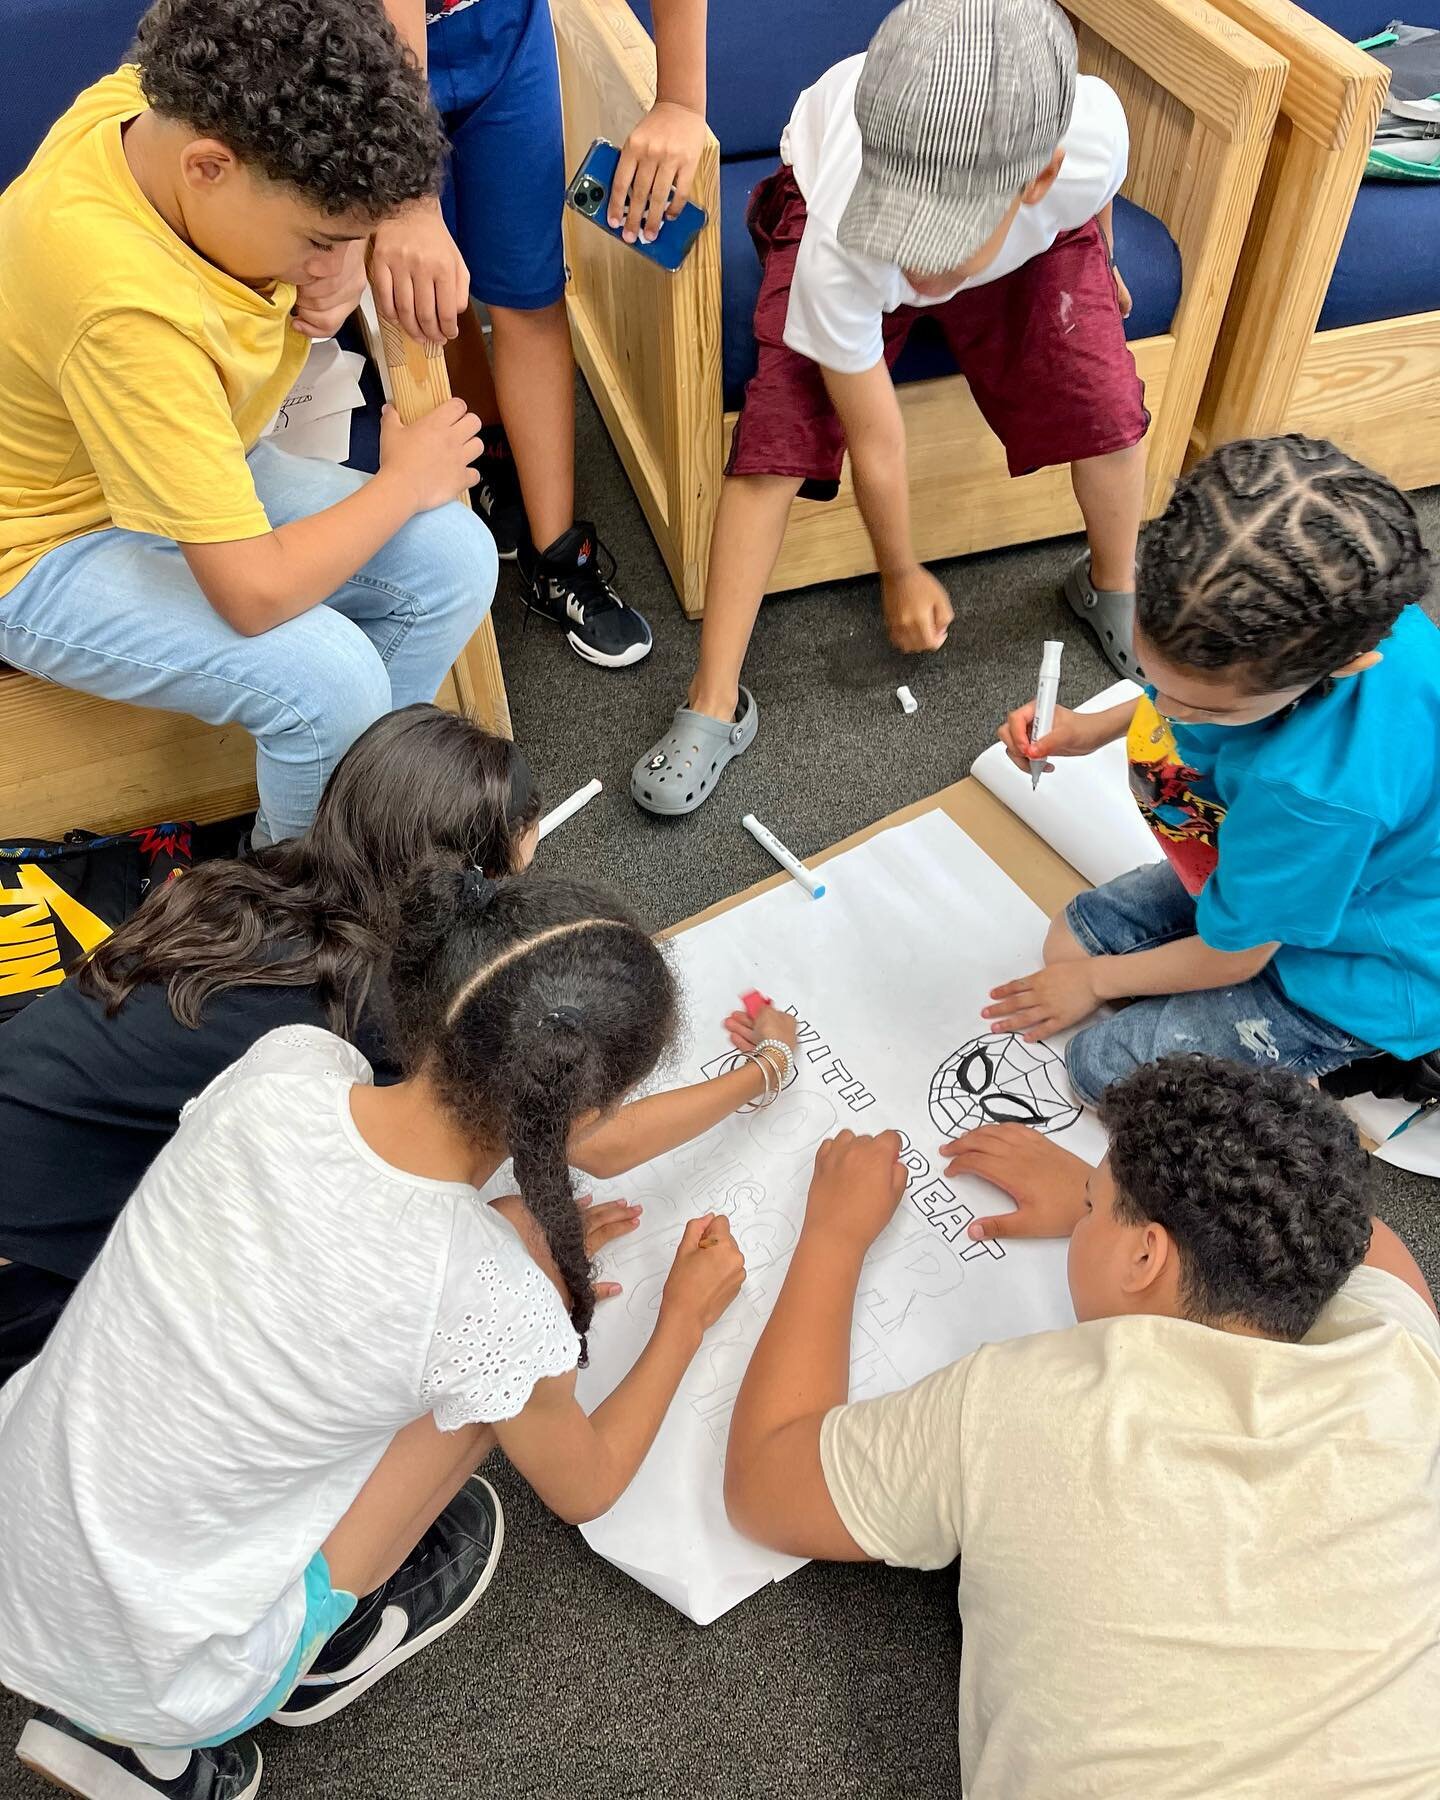 Teamwork makes the dream work! First week of #SummerRising. The rising 6th grade groups are getting to know one another, team-build, and get ready for friendly competition throughout the 6 weeks of camp. 
@nycyouth